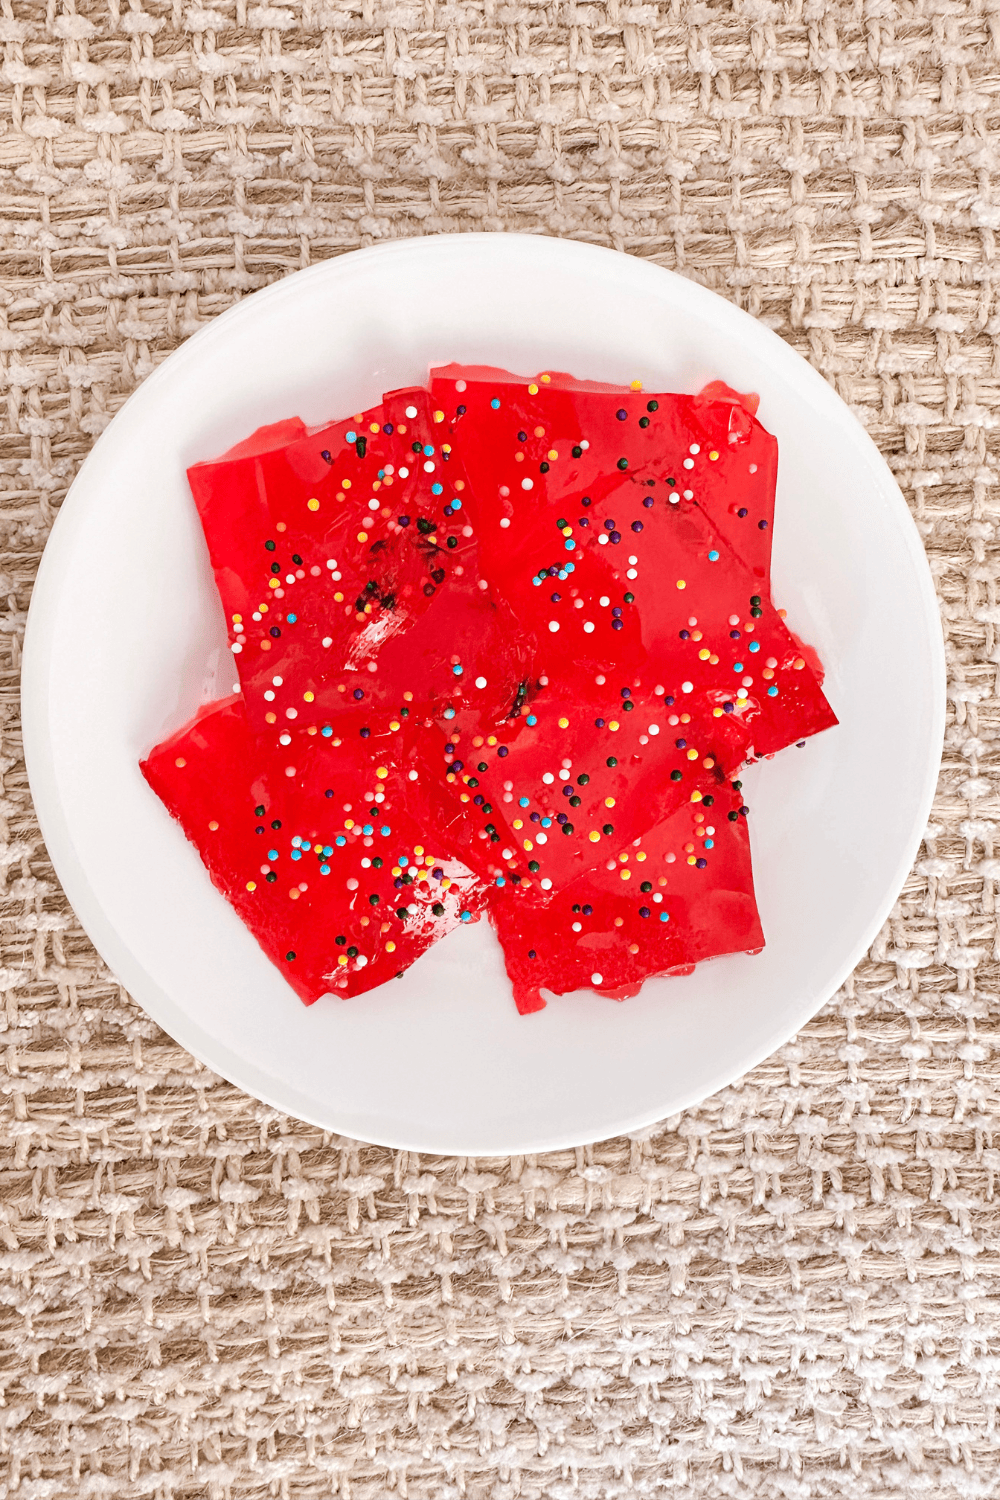 Red jello with rainbow sprinkles on a white plate